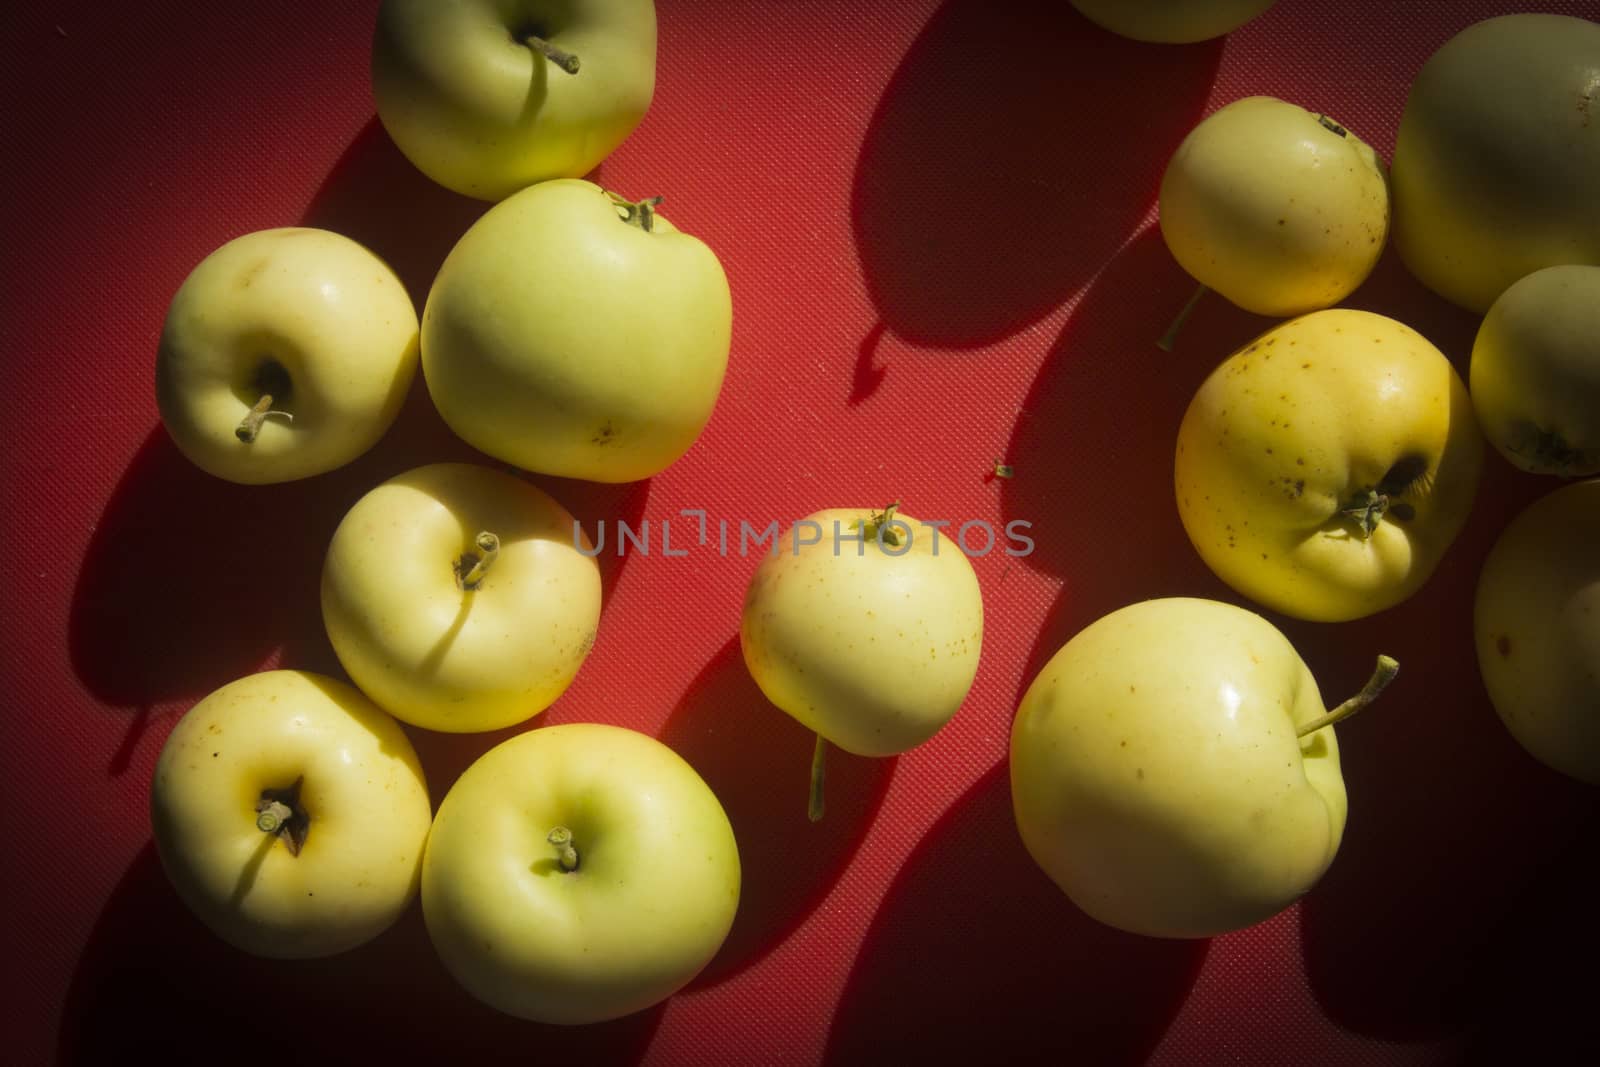 Yellow apples on a table with a red tablecloth